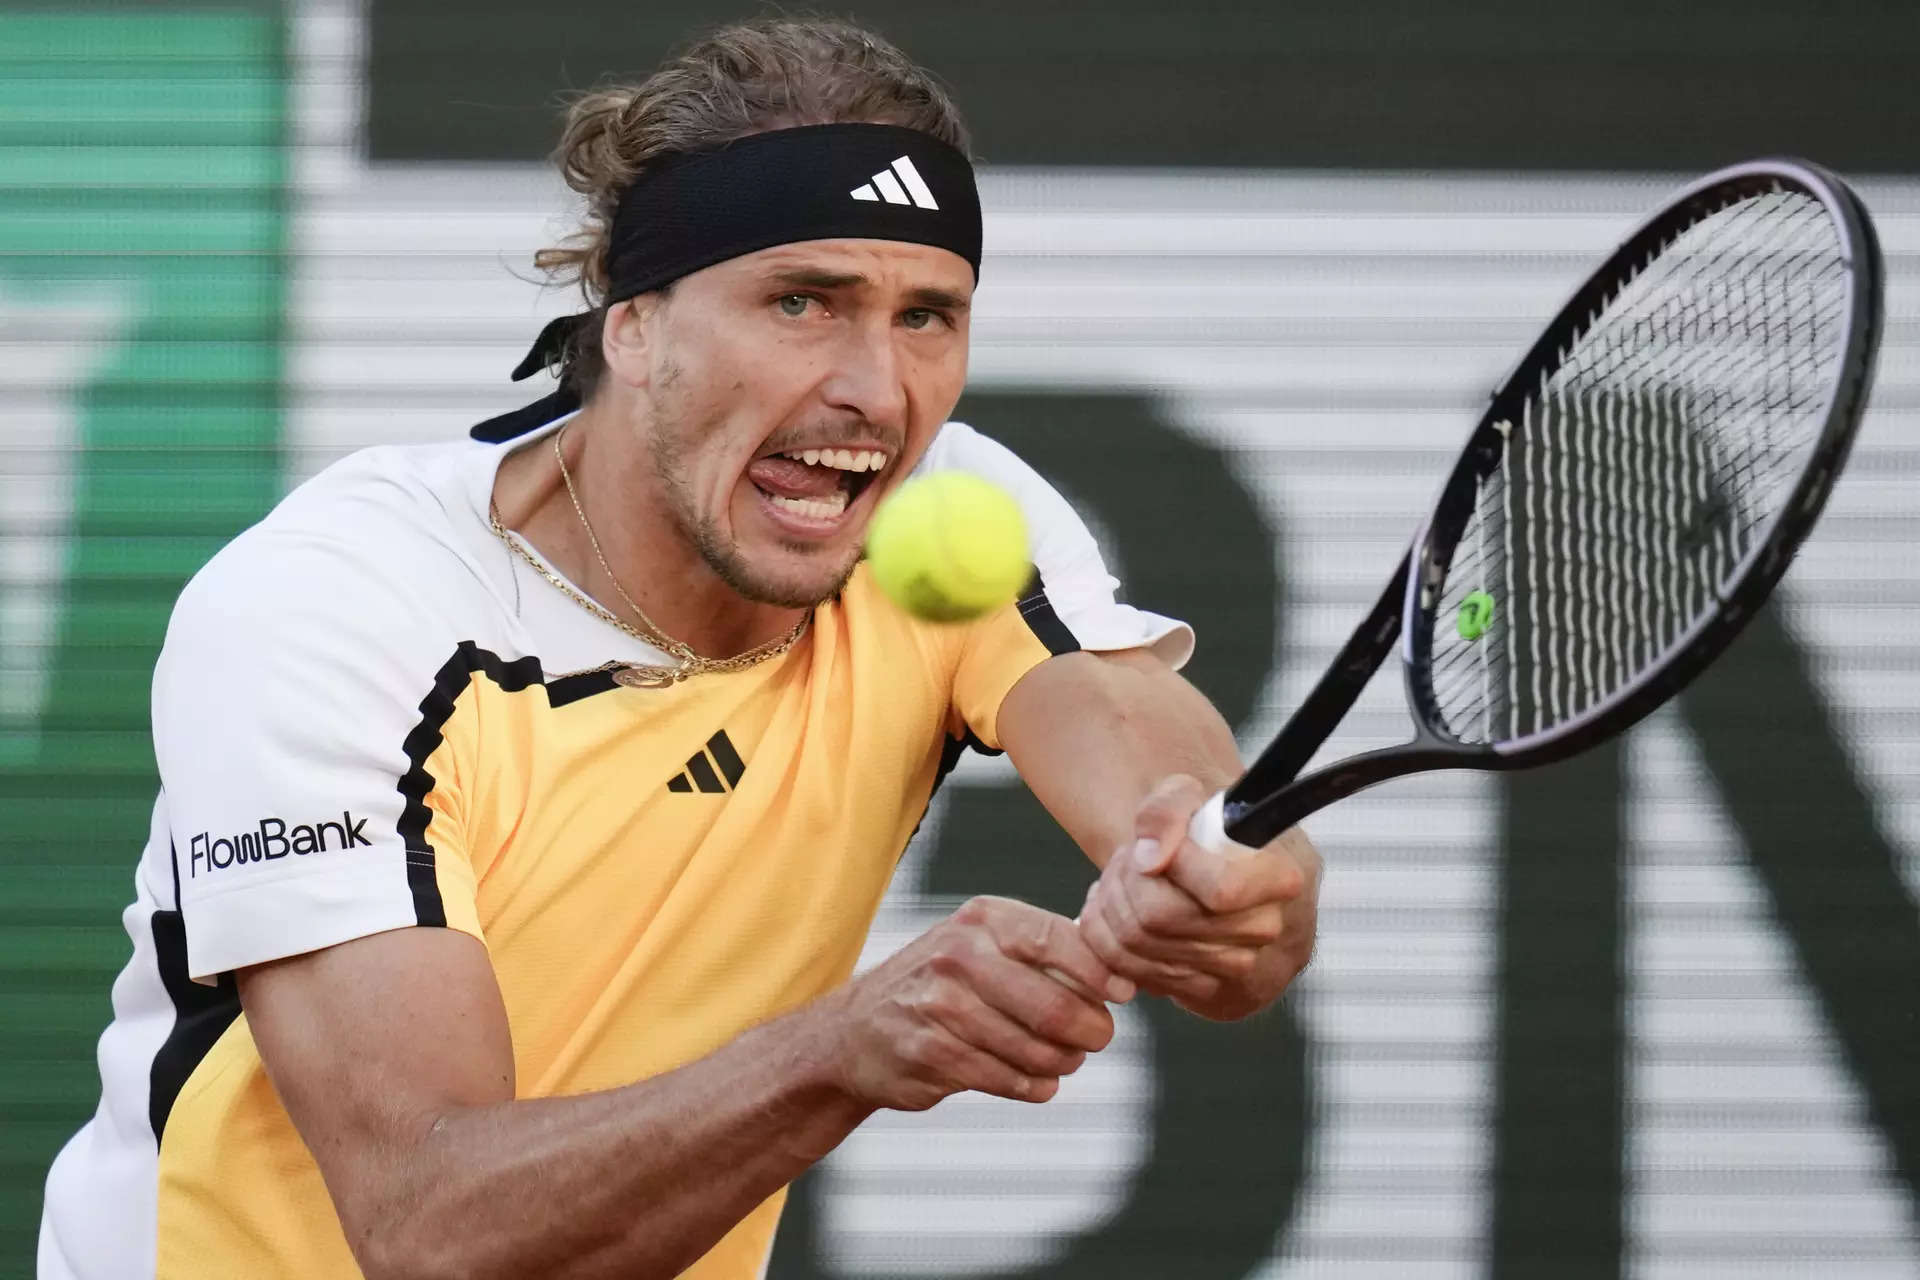 French Open men's final: Carlos Alcaraz seeks a third Grand Slam title and Alexander Zverev a first